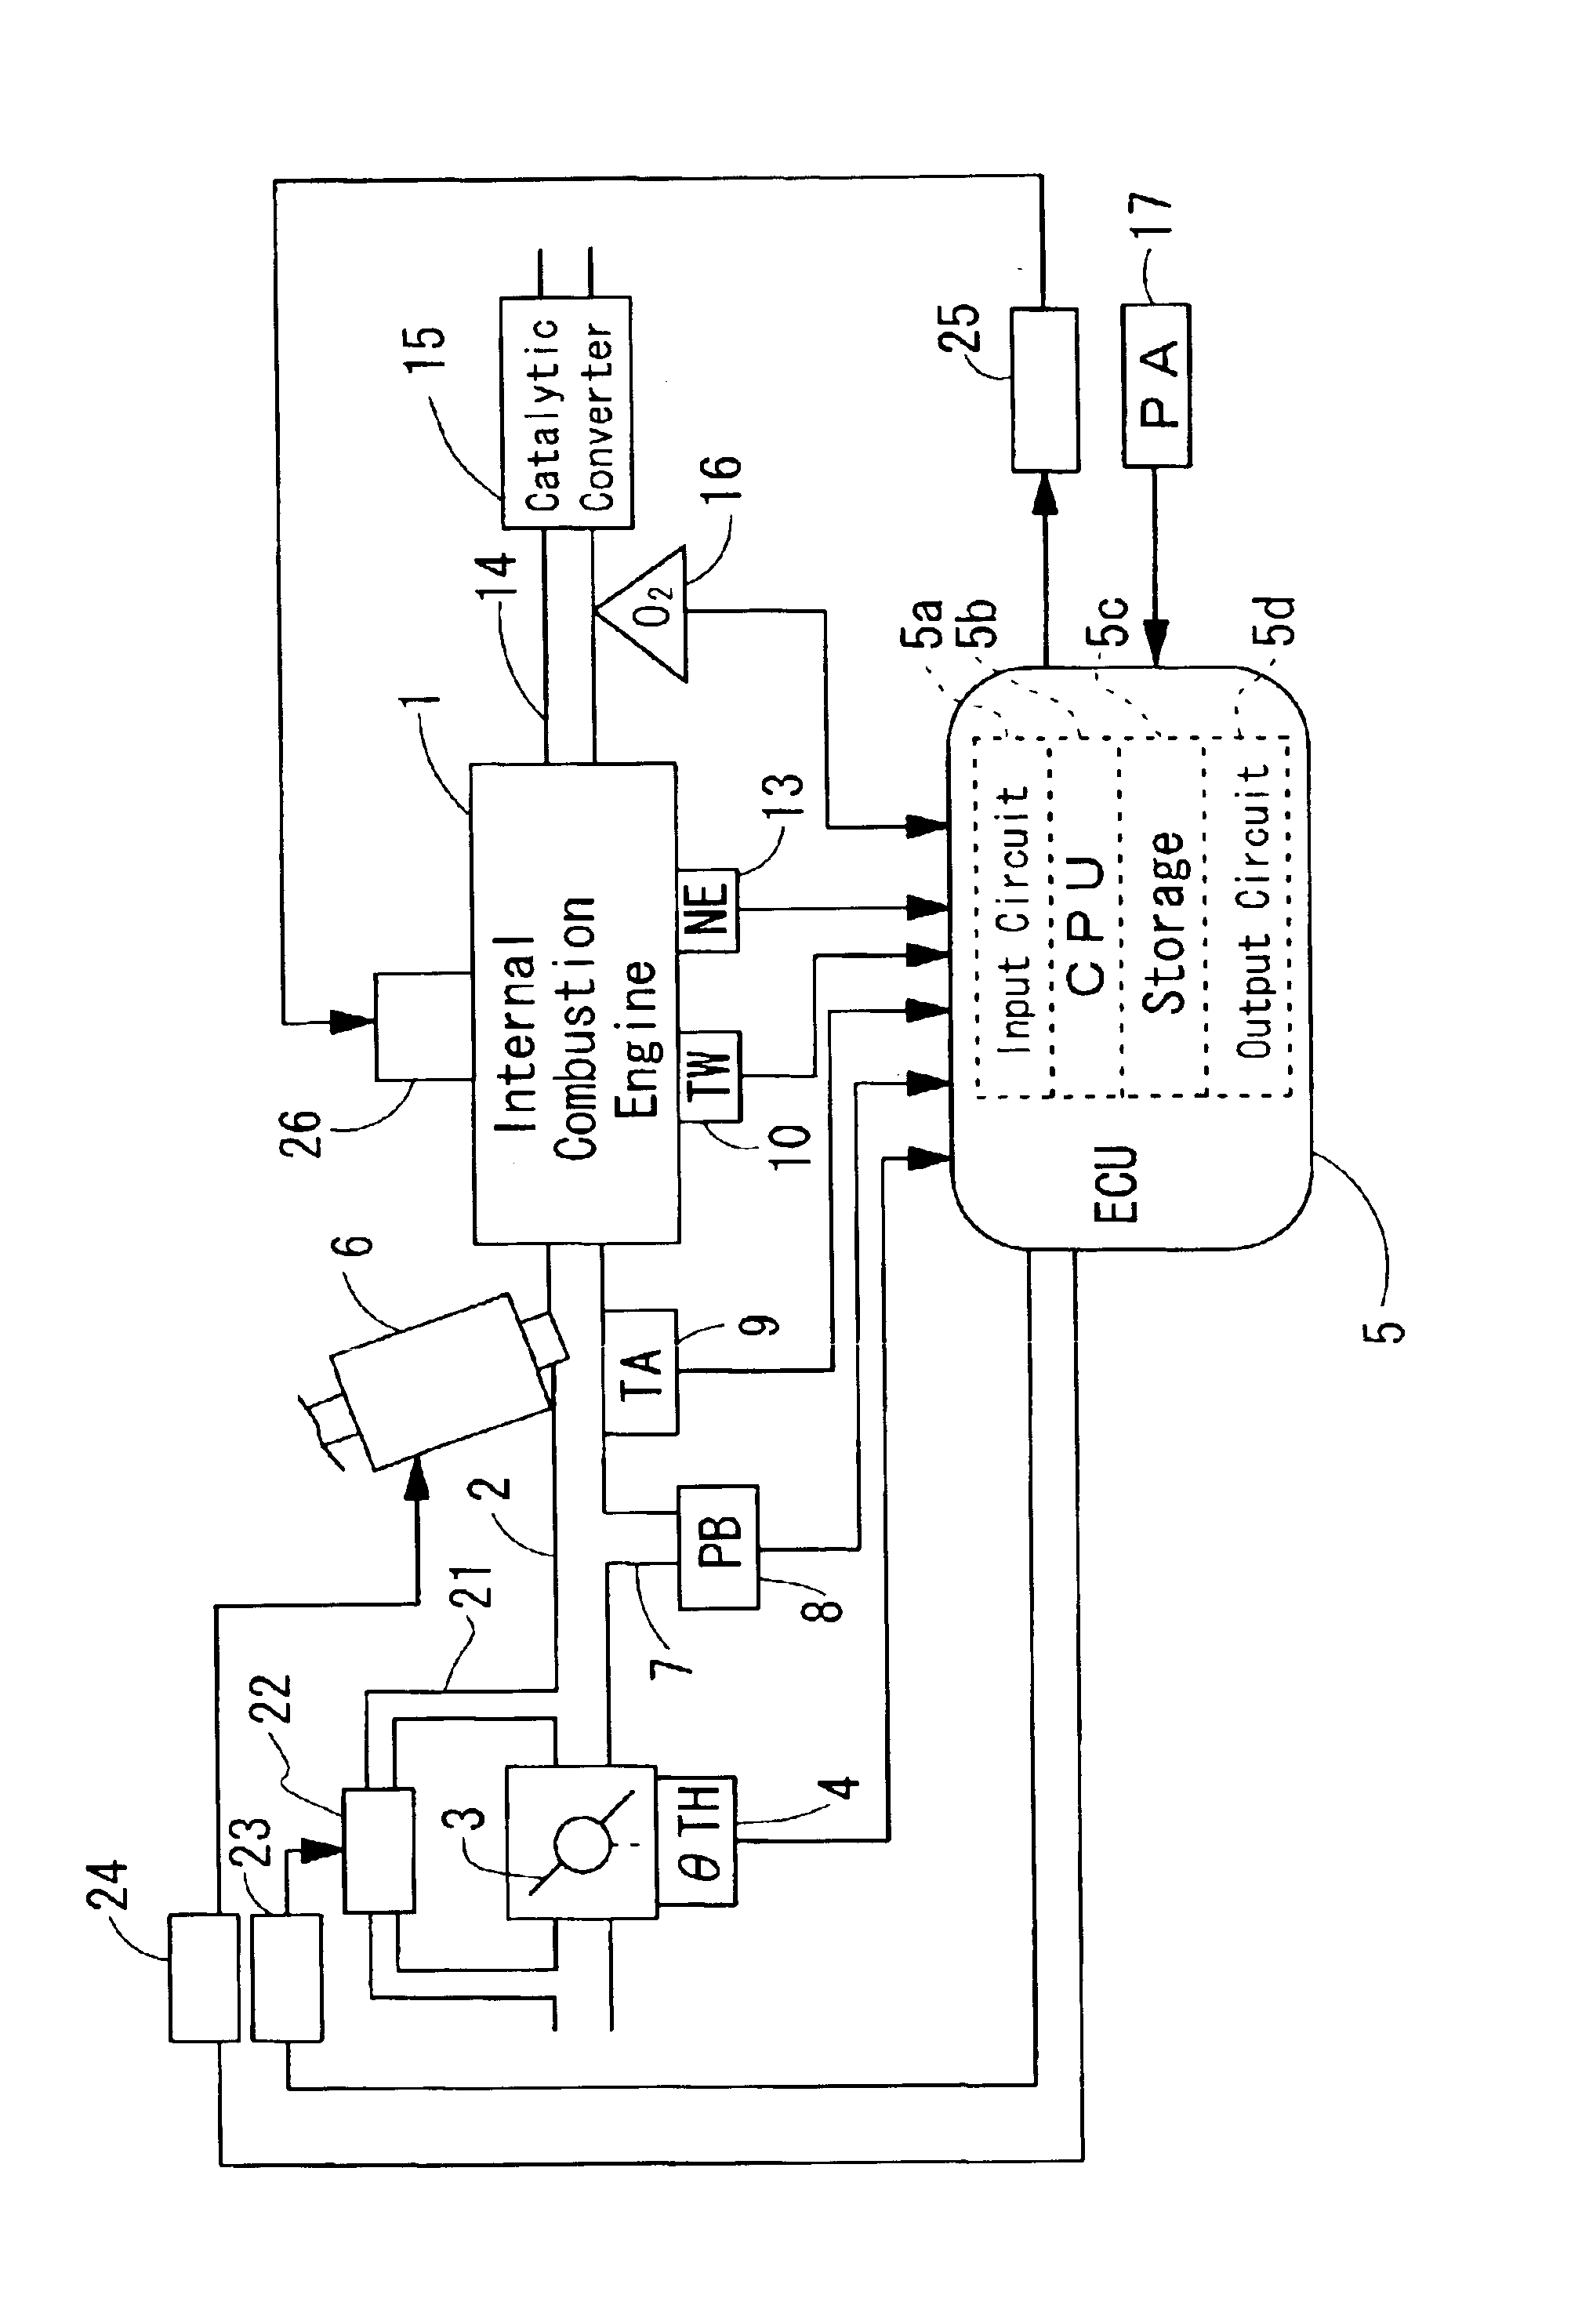 Plant controller for frequency-shaping response-designating control having a filtering function